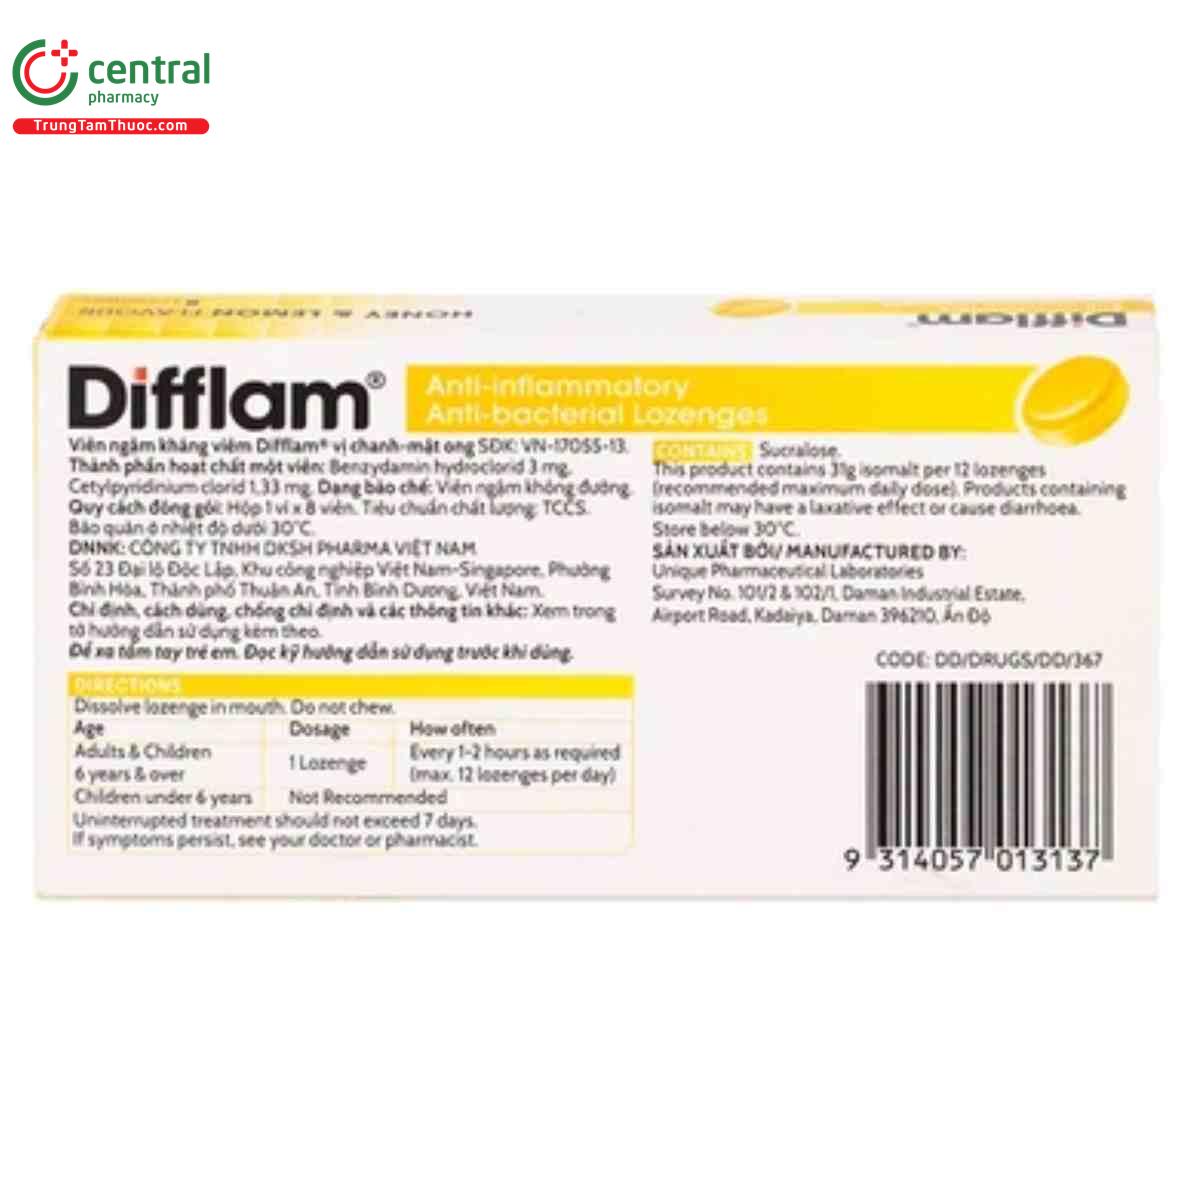 difflam vi chanh mat ong 5 L4286